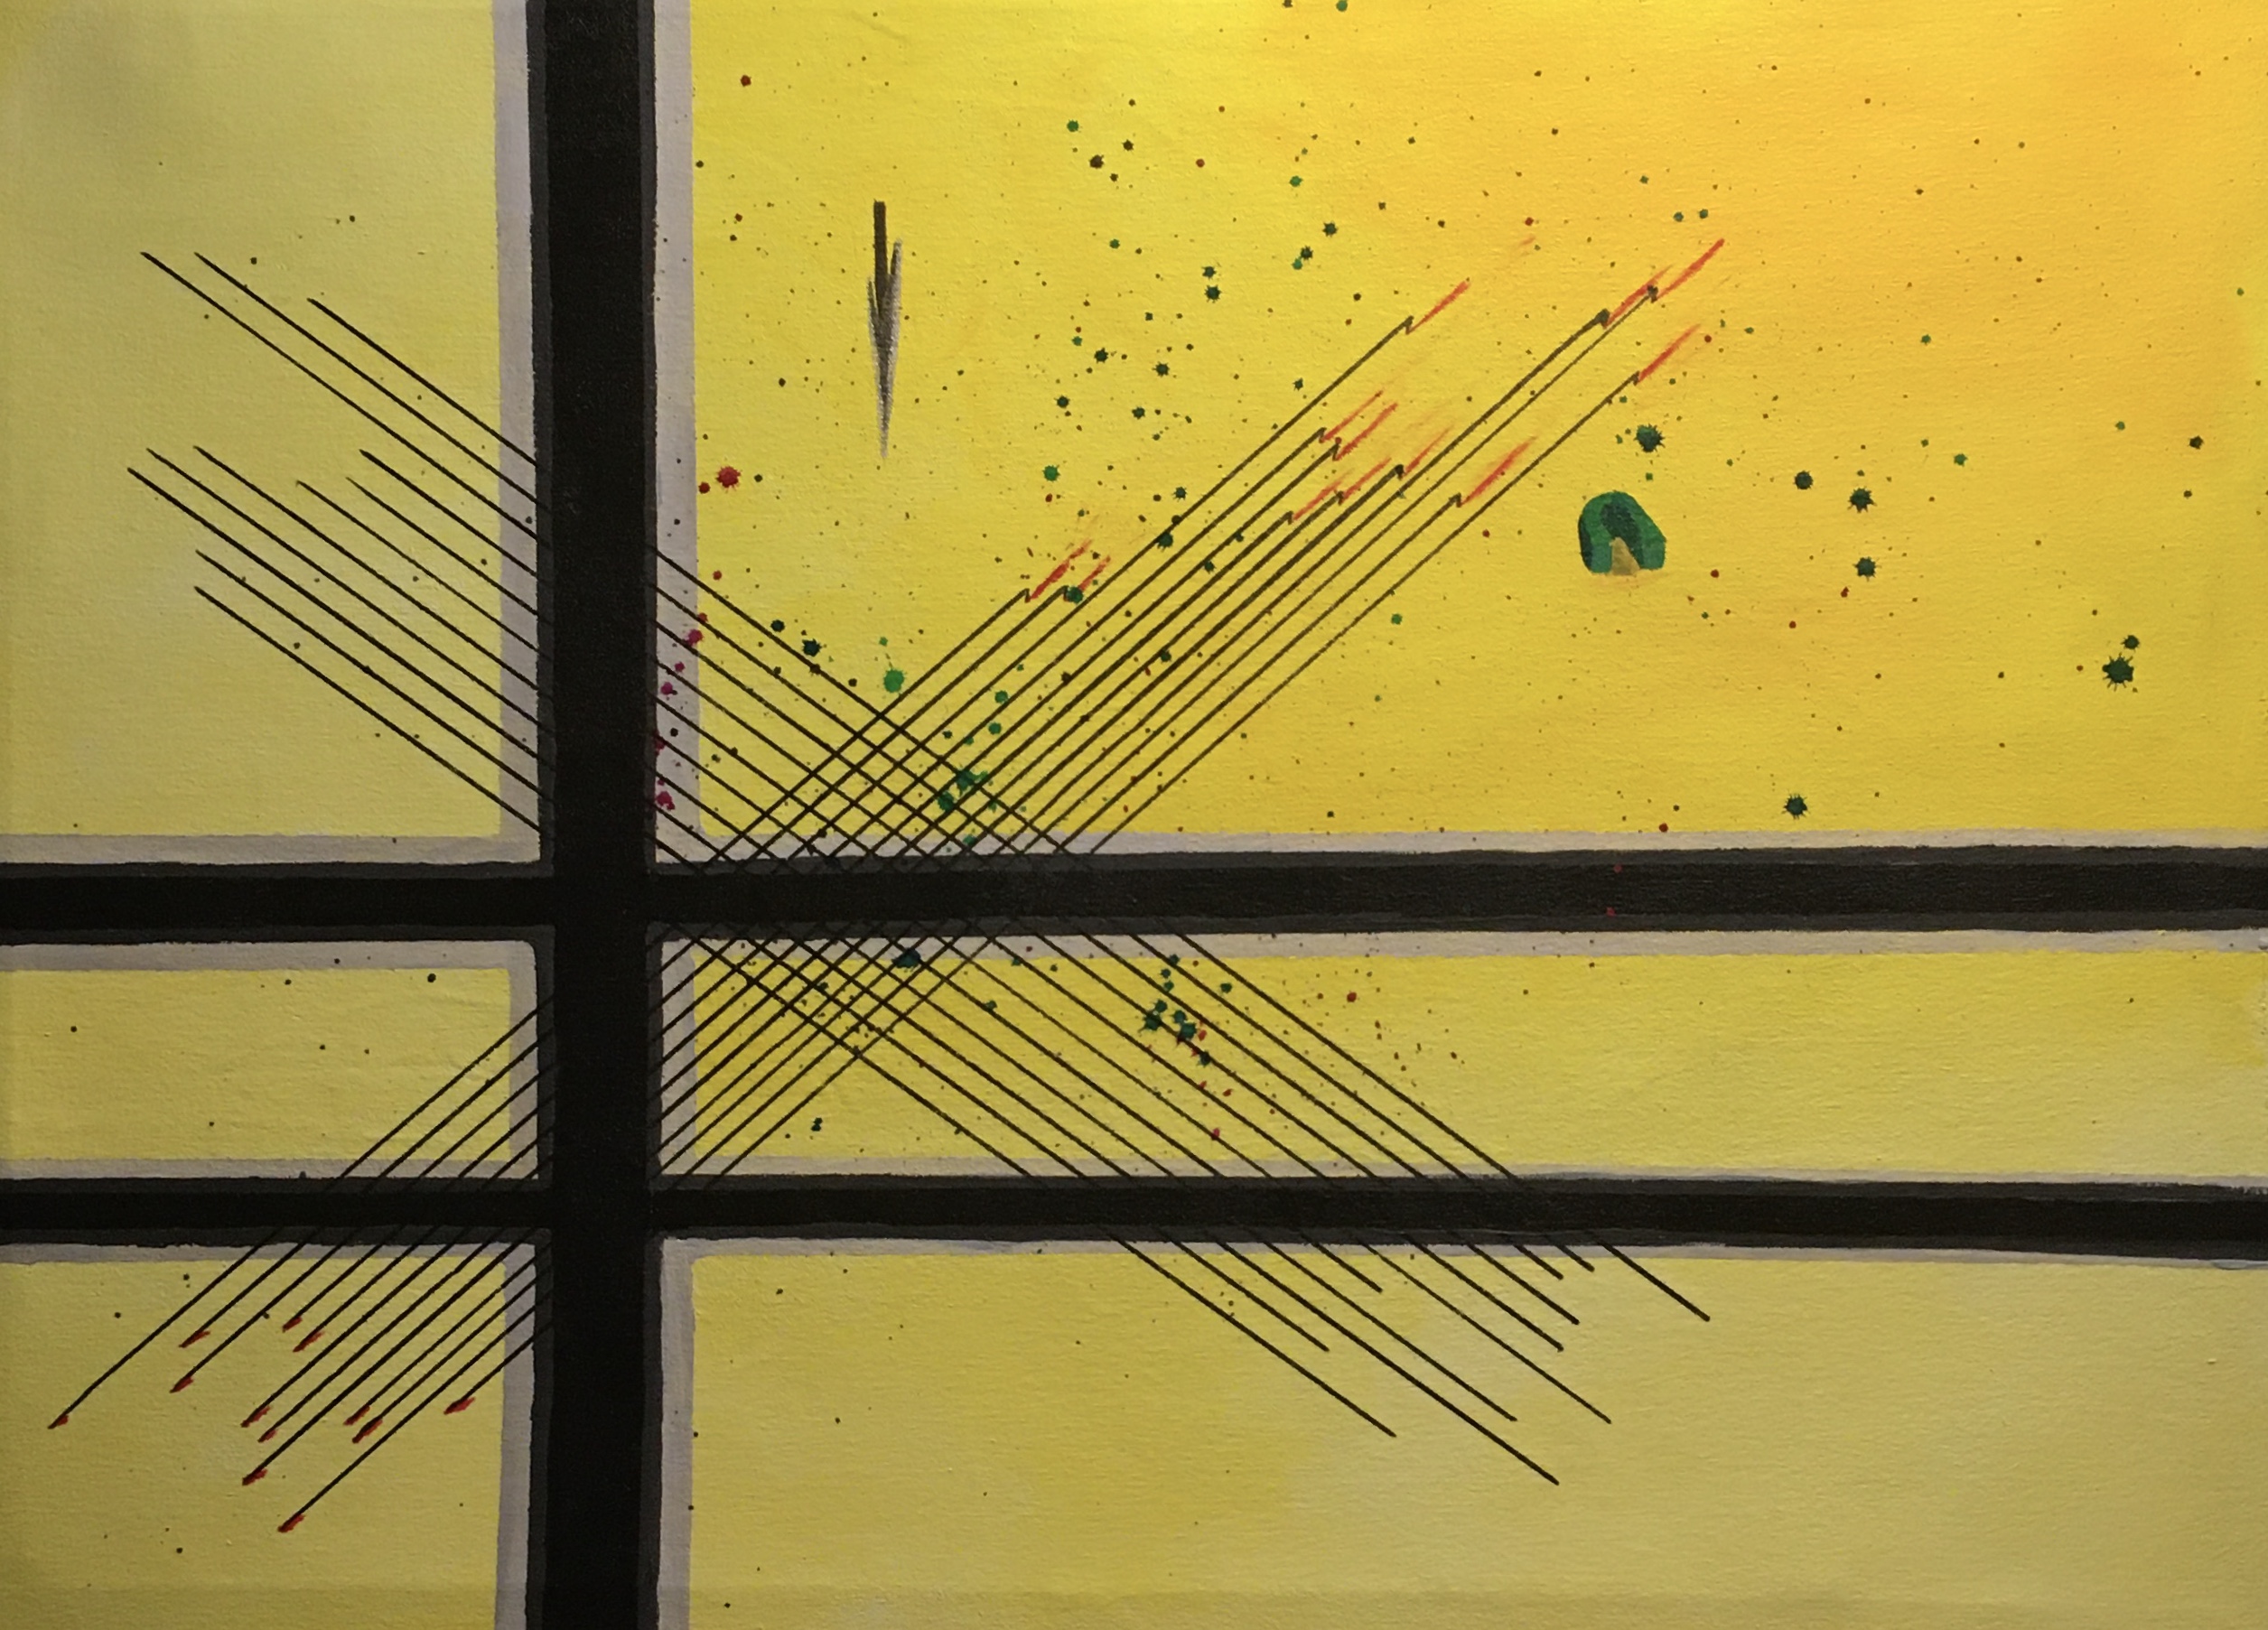 abstract painting with yellow background and dark lines crossing it with splatters